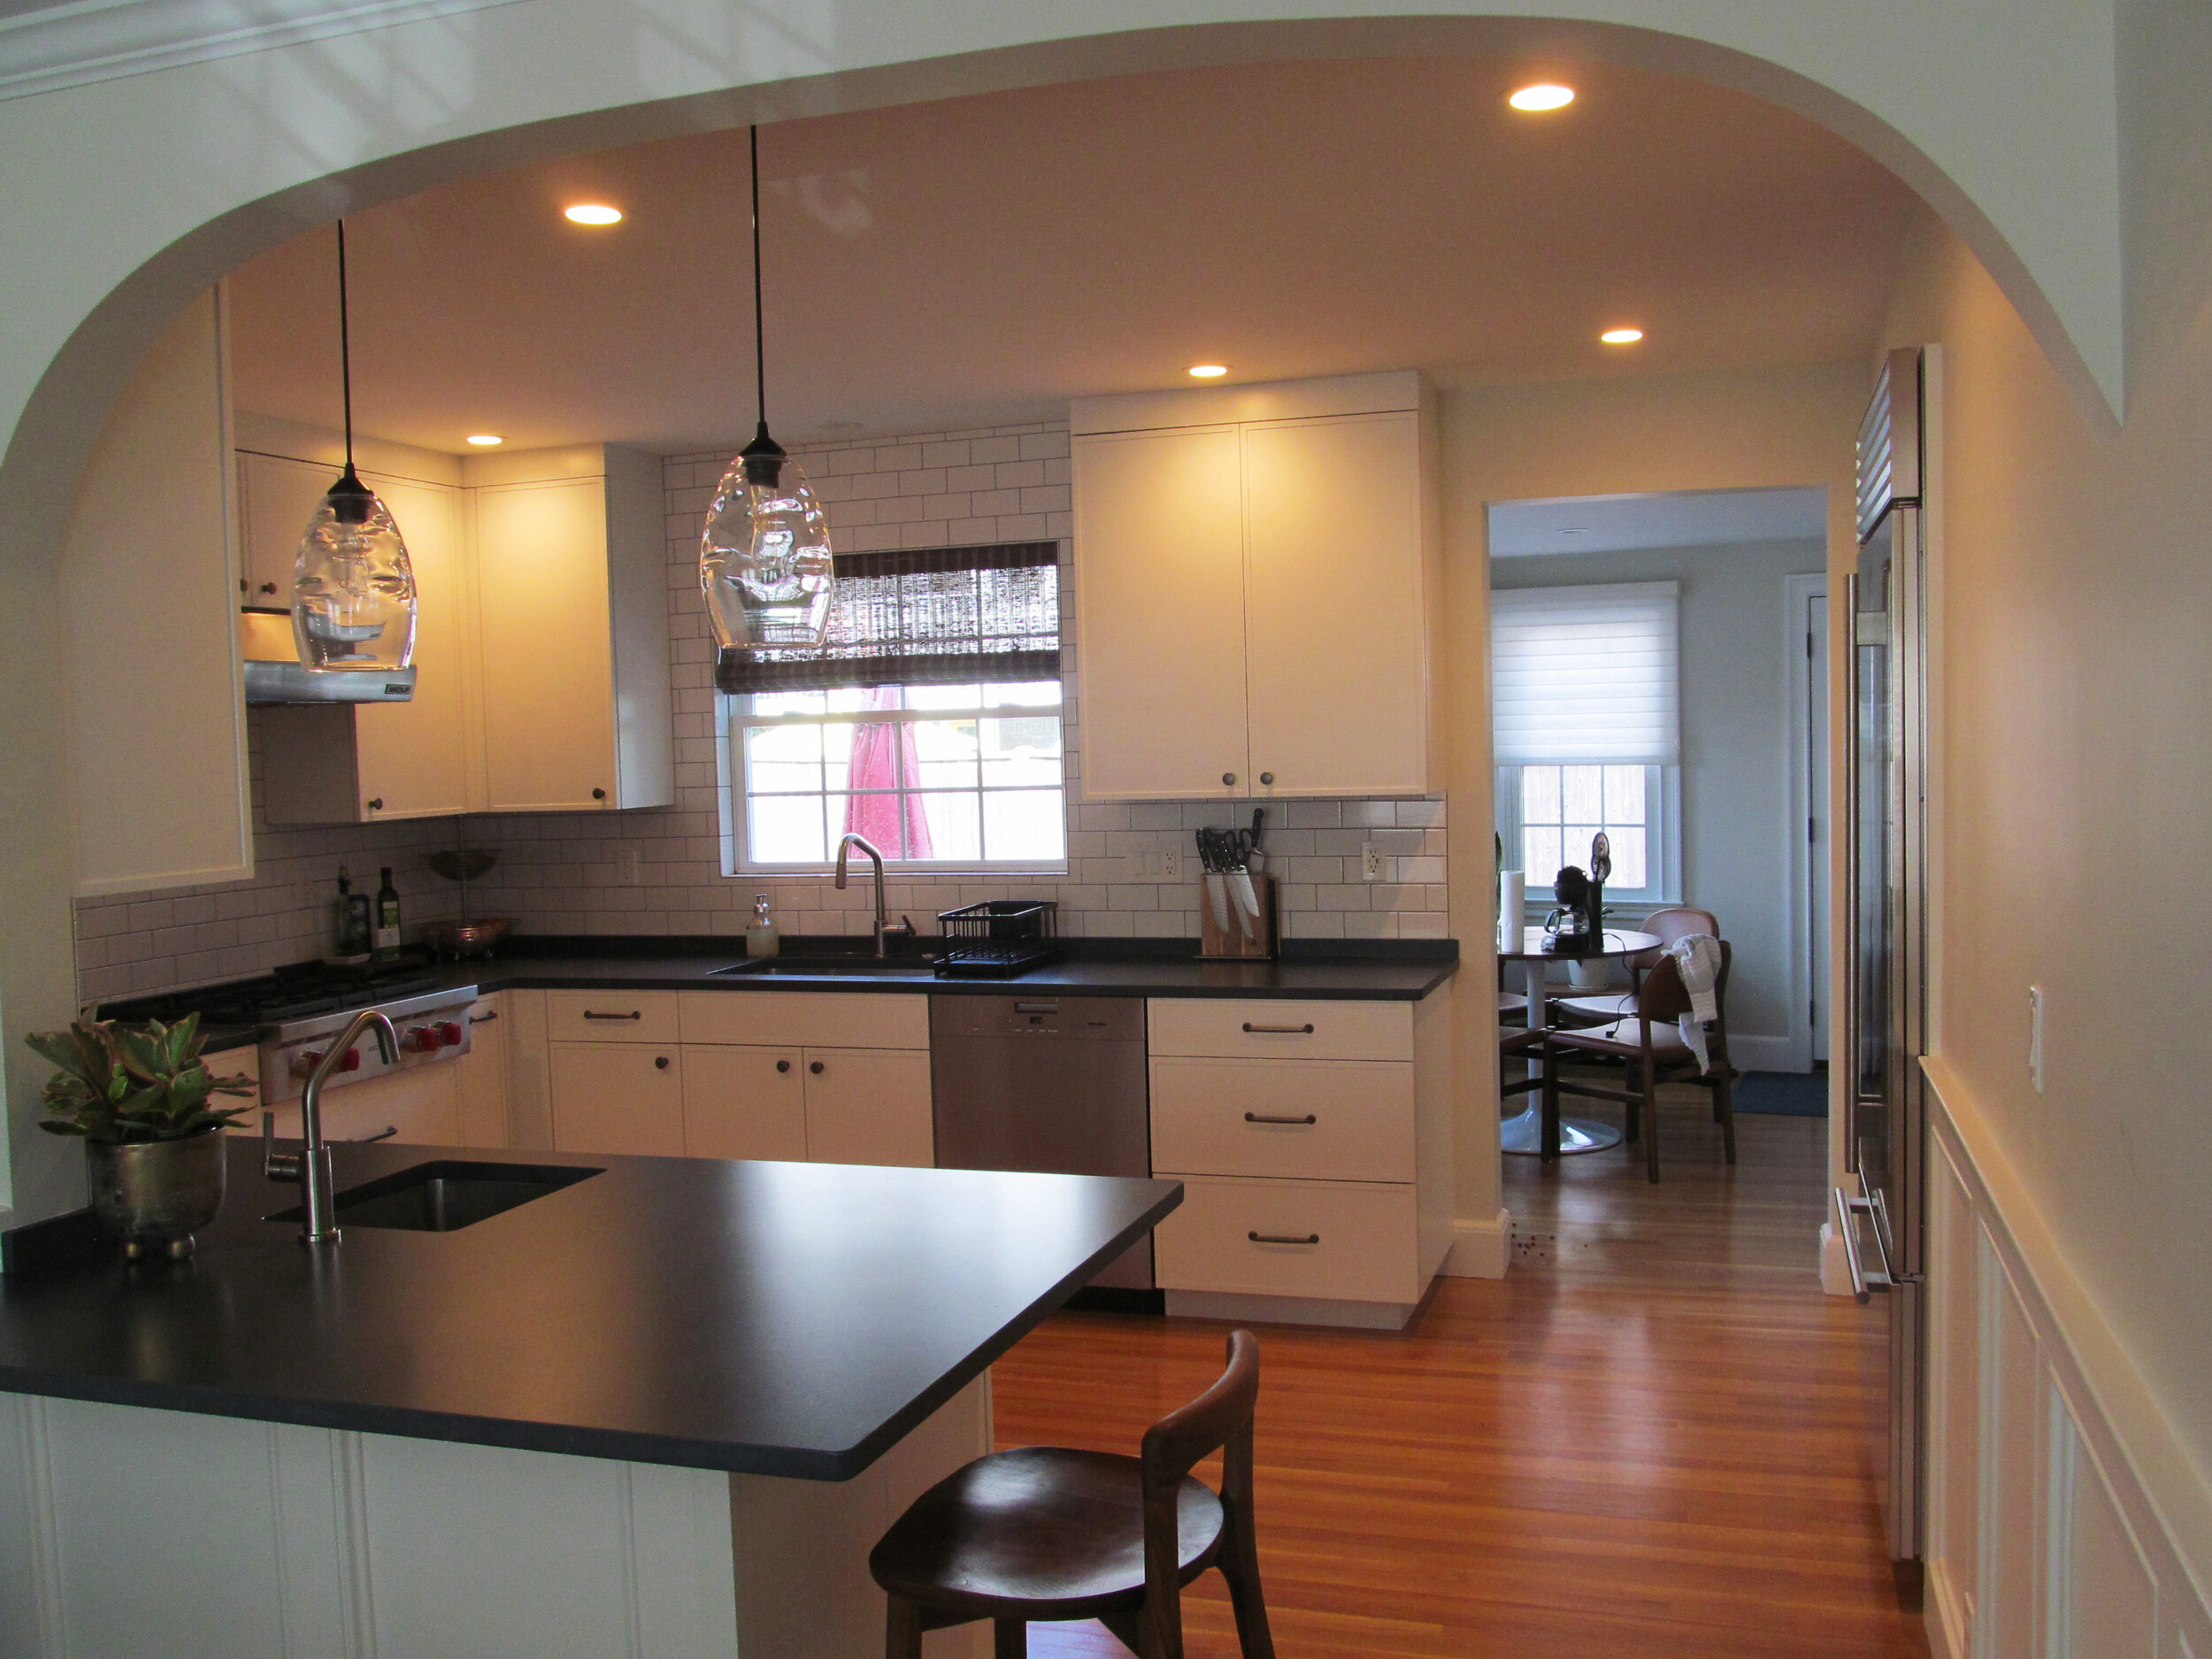 An archway over a peninsula leads into this Brookline kitchen featuring Imperia cabinets painted in Designer White.